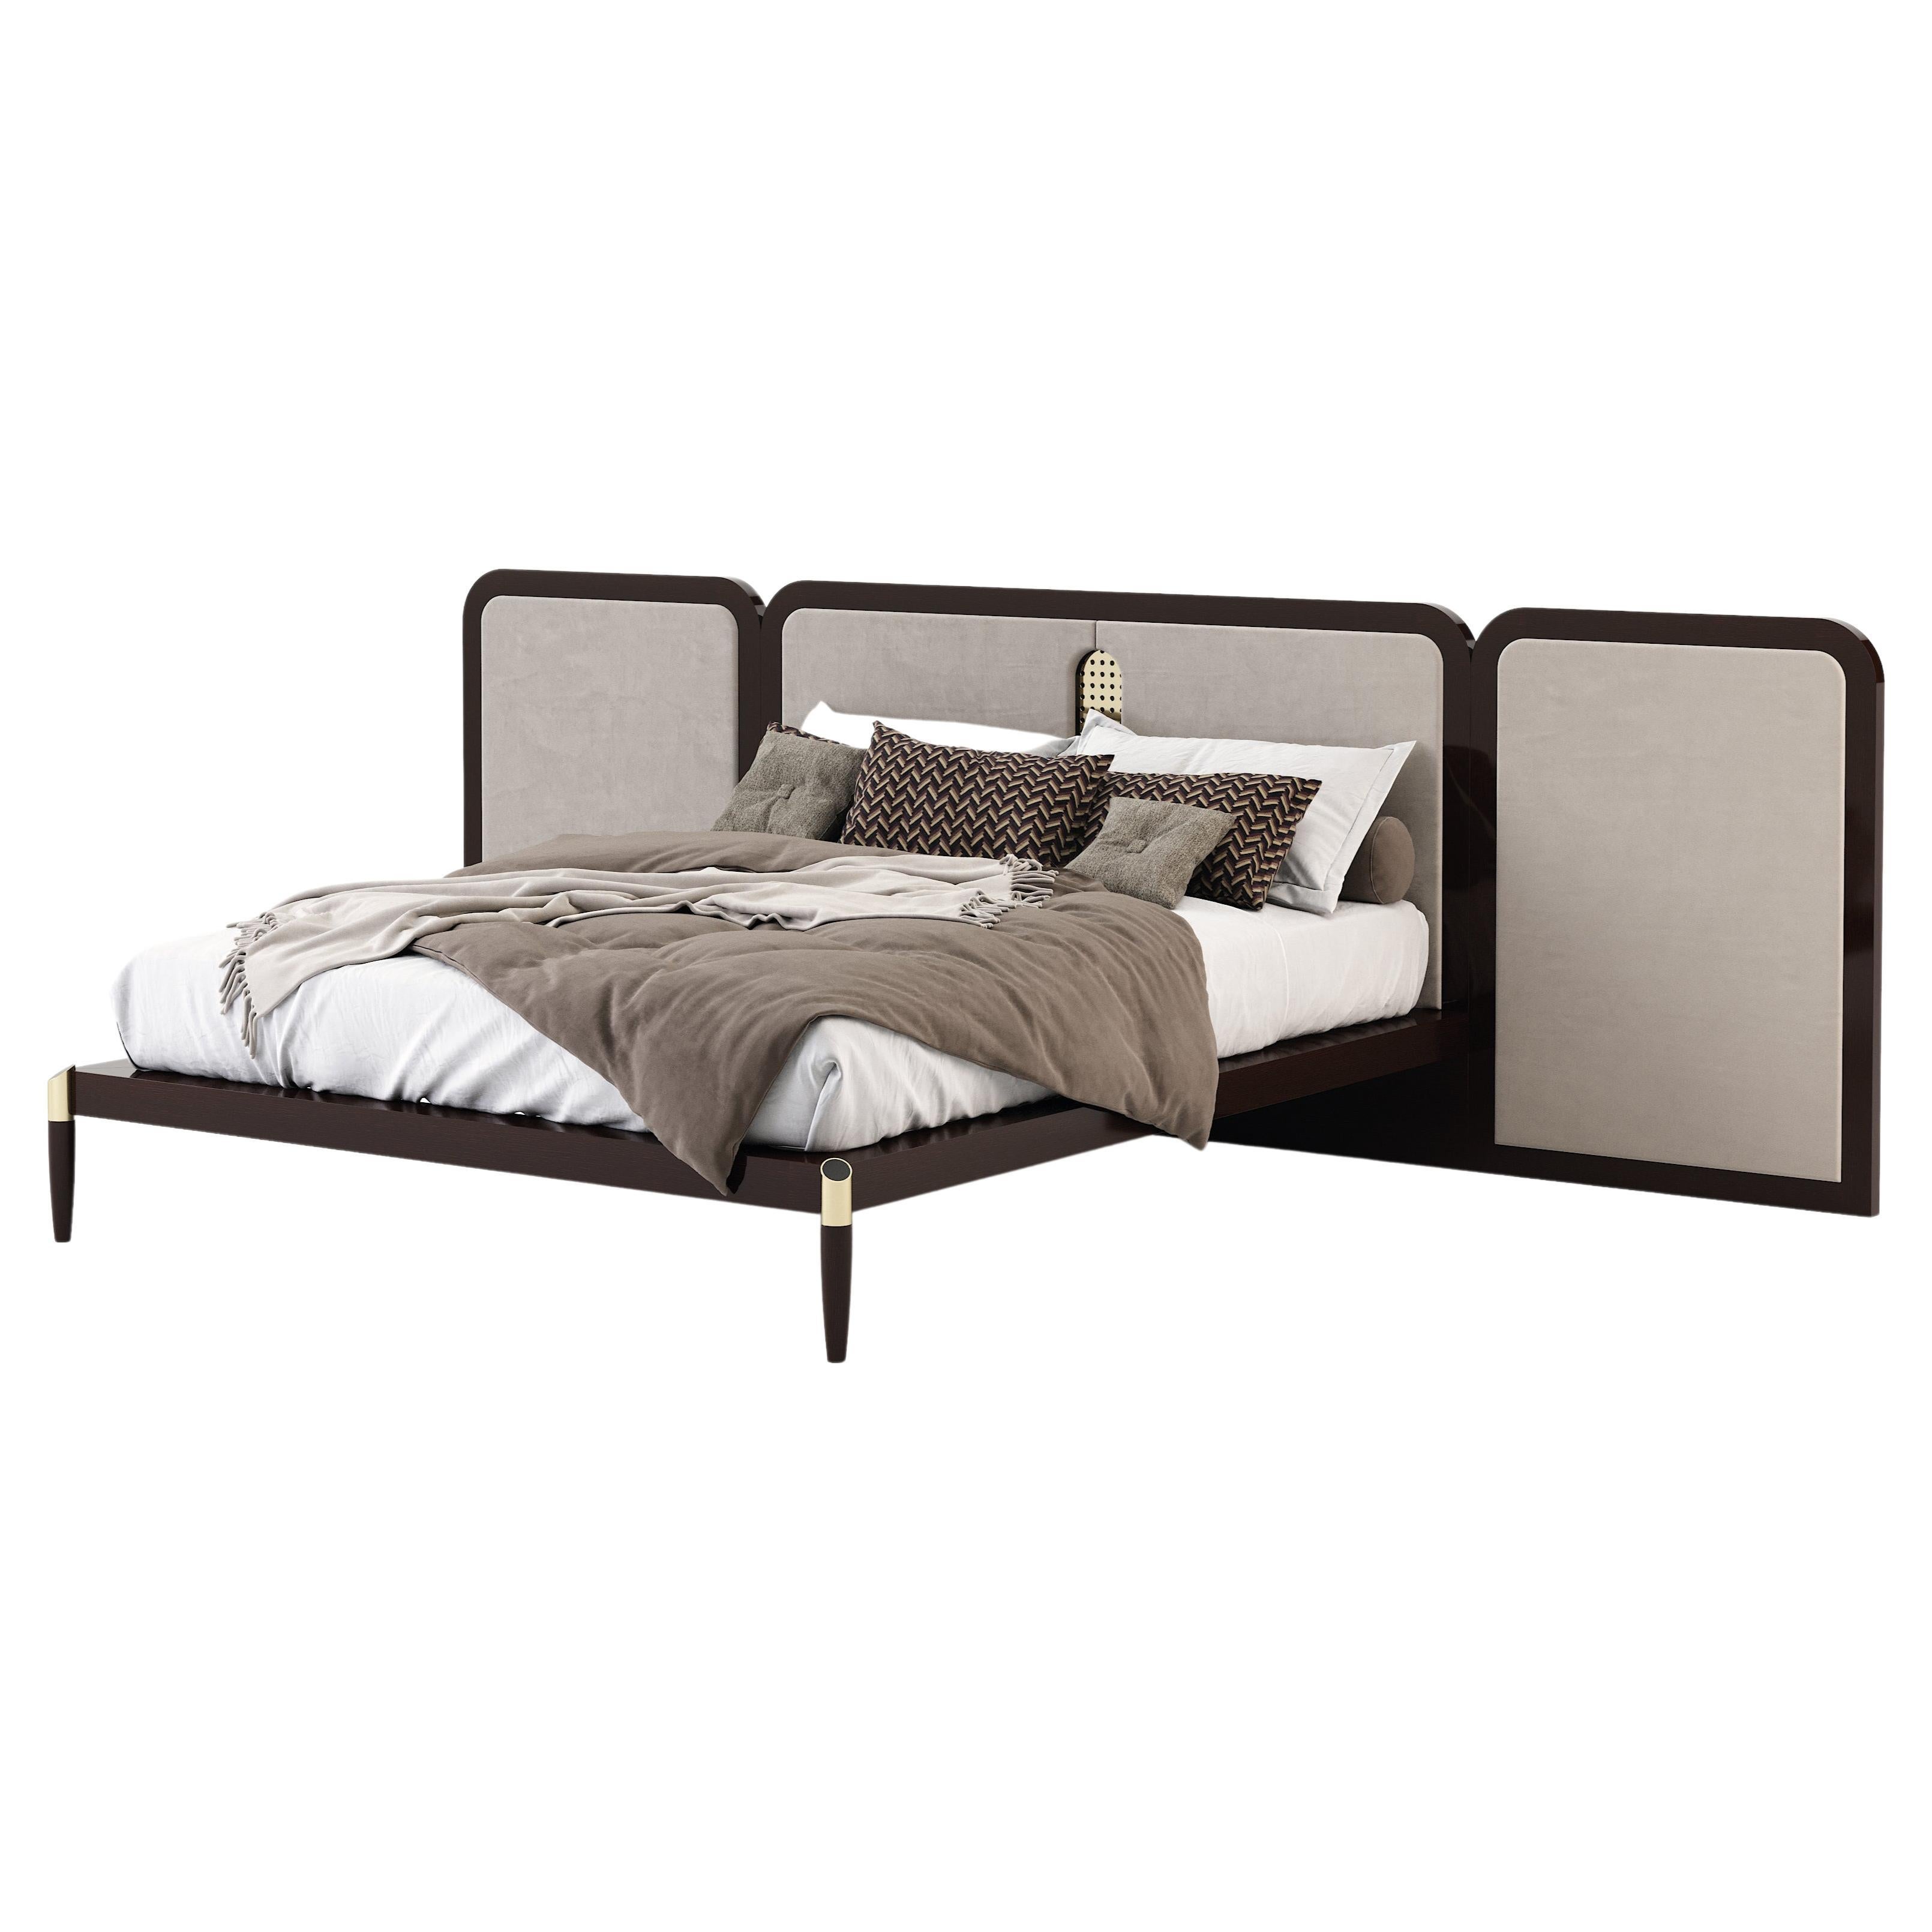  Double Contemporary Her Bed Made with High Gloss Oak, Handmade by Stylish Club